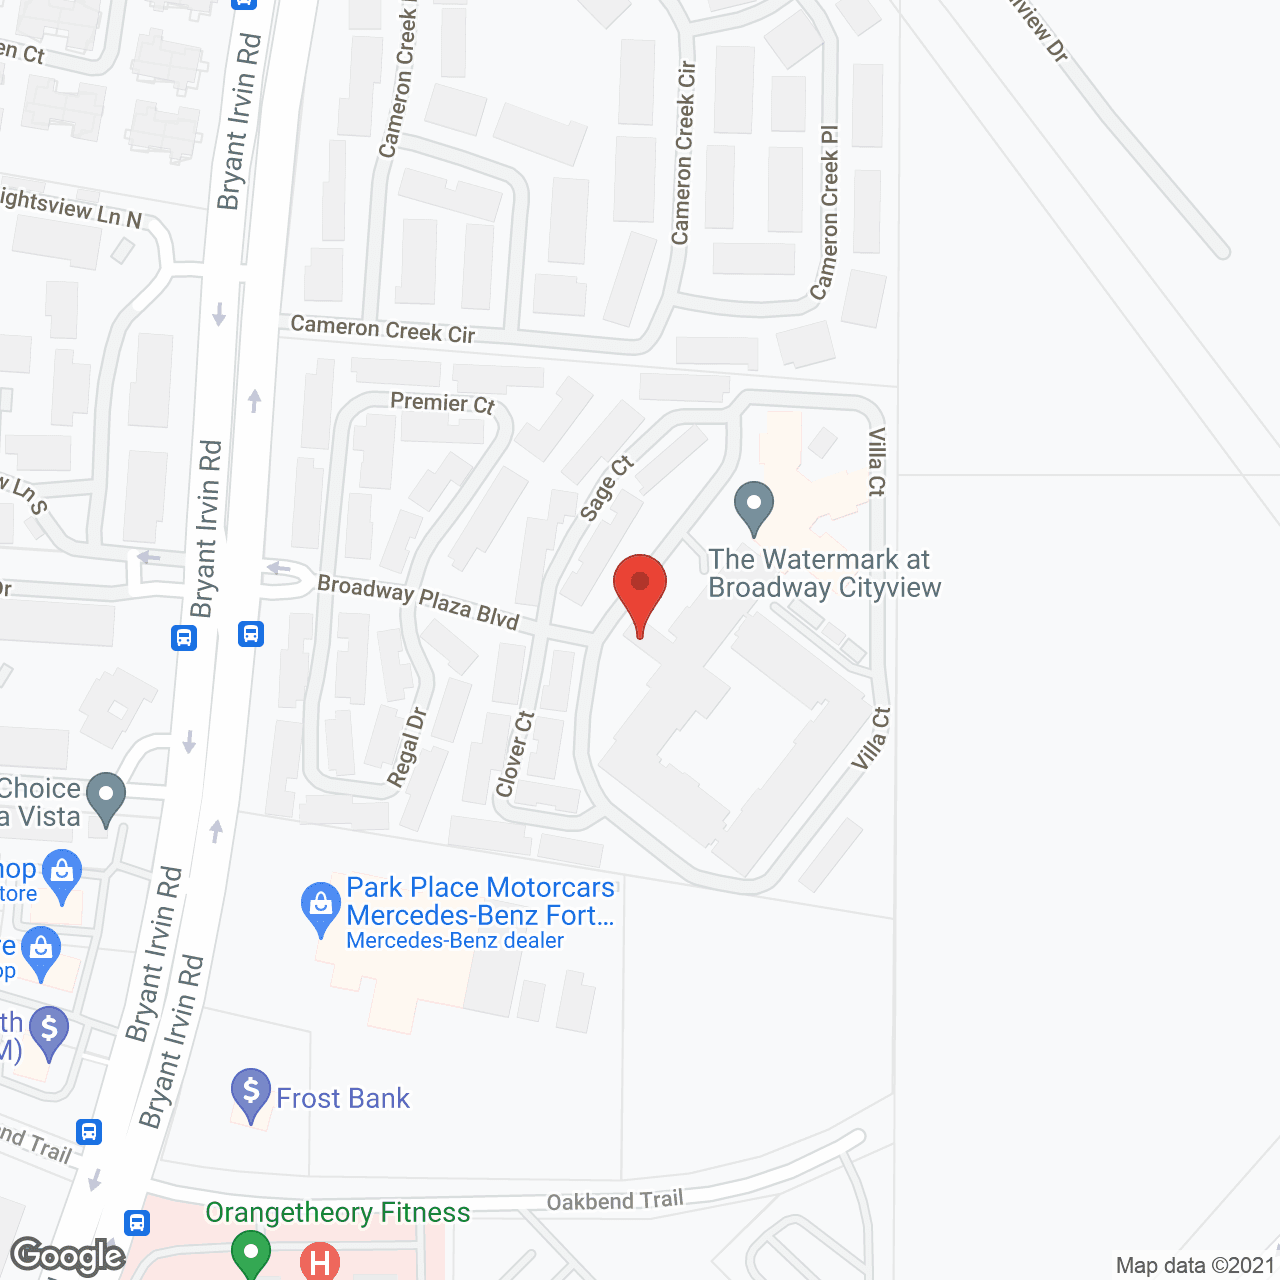 The Watermark at Broadway Cityview in google map